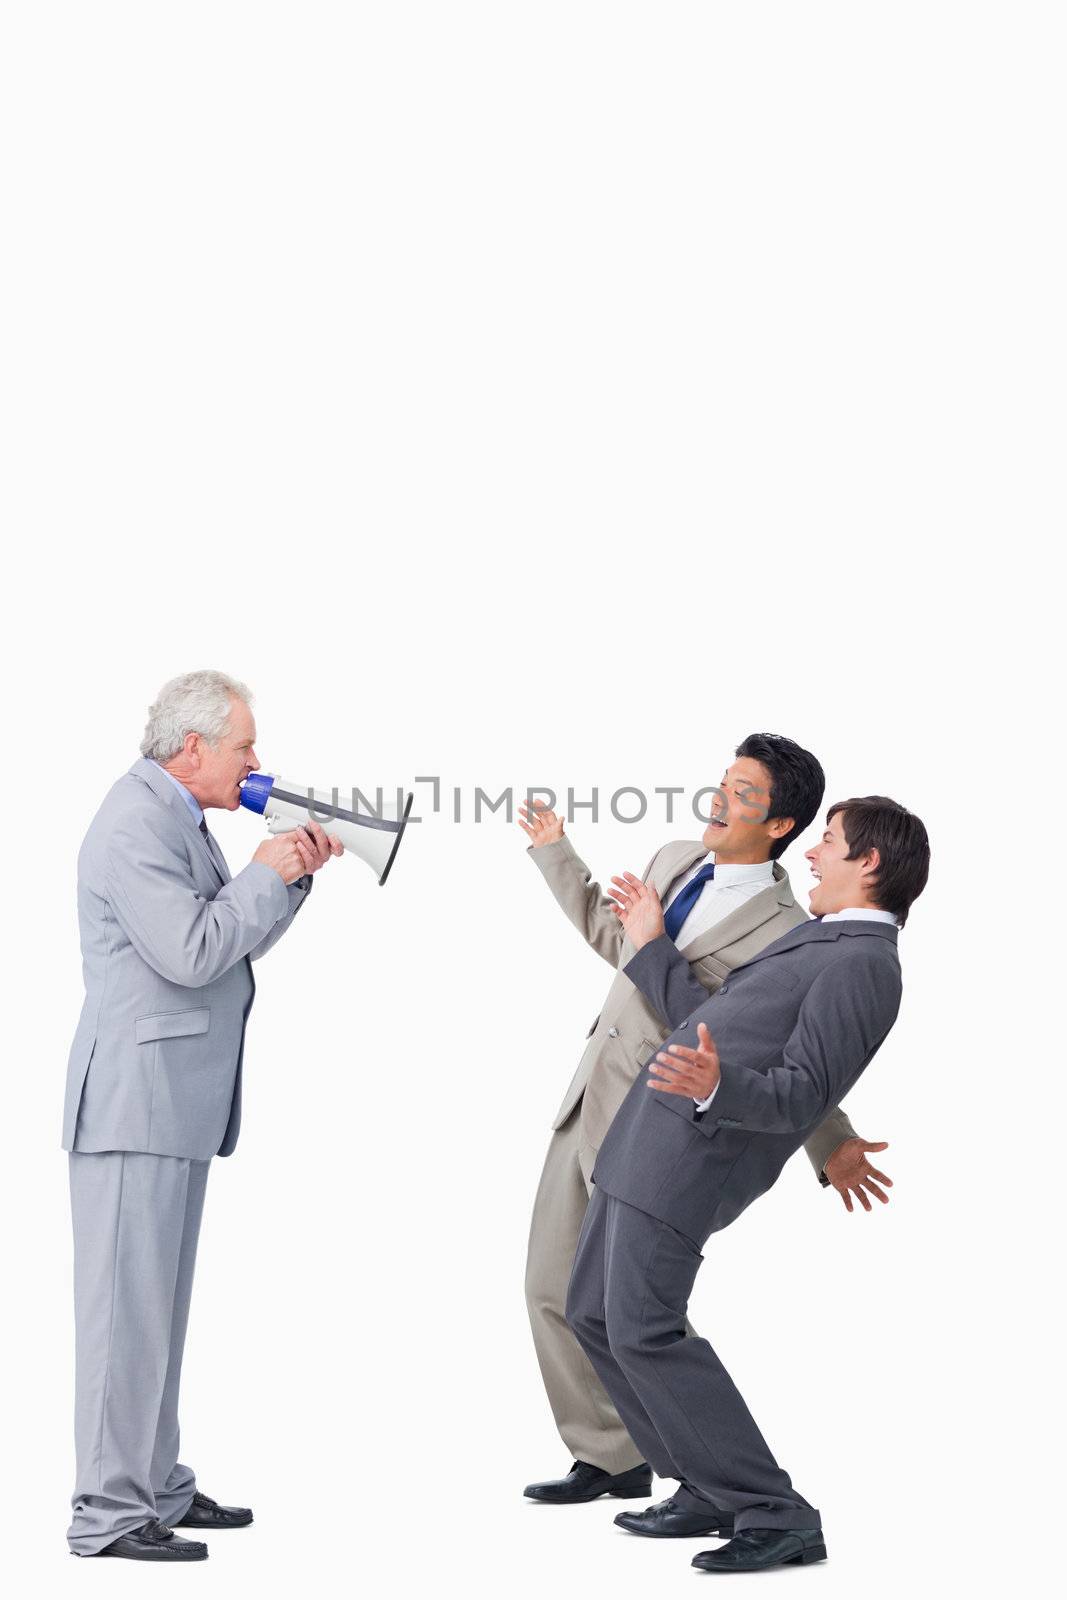 Mature businessman with megaphone yelling at his employees against a white background